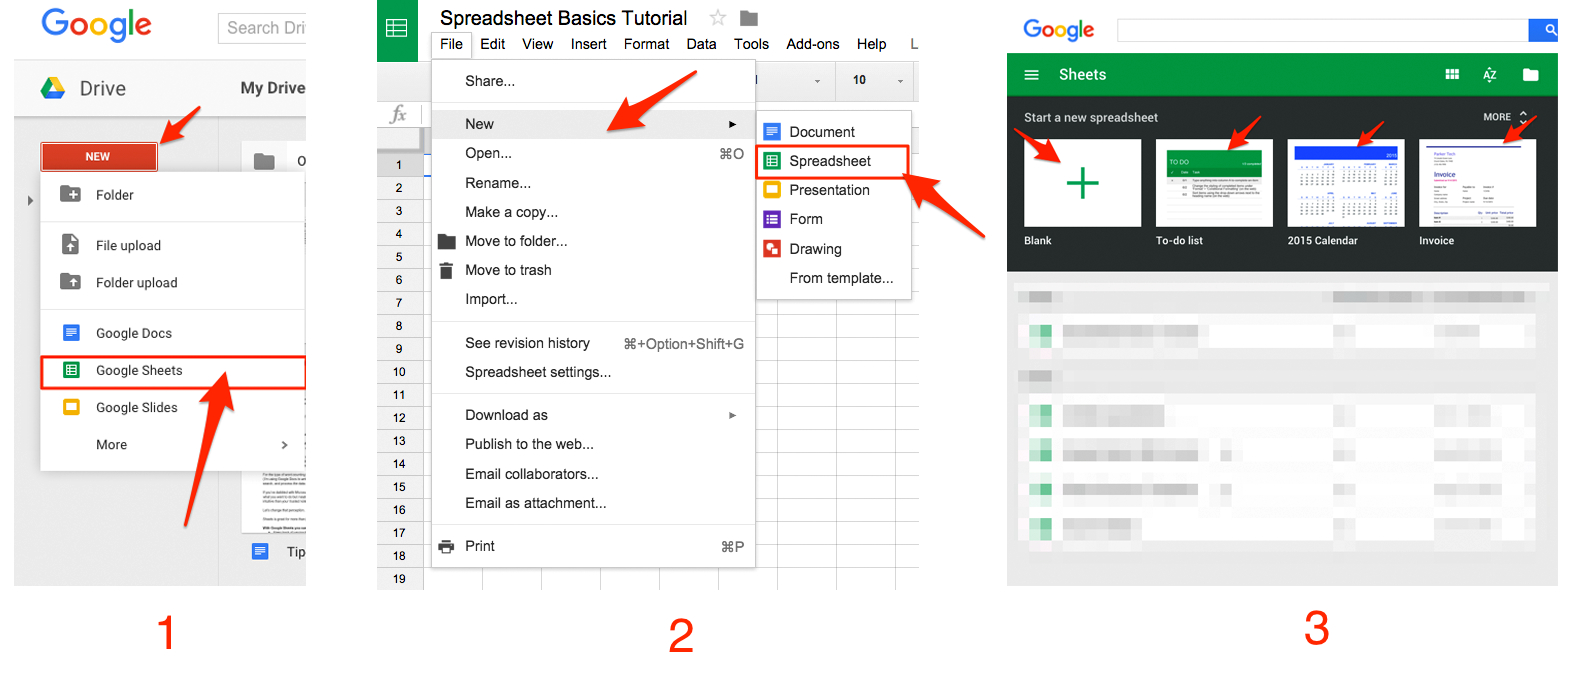 Google Sheets 101: The Beginner's Guide To Online Spreadsheets - The Throughout Learning Excel Spreadsheets